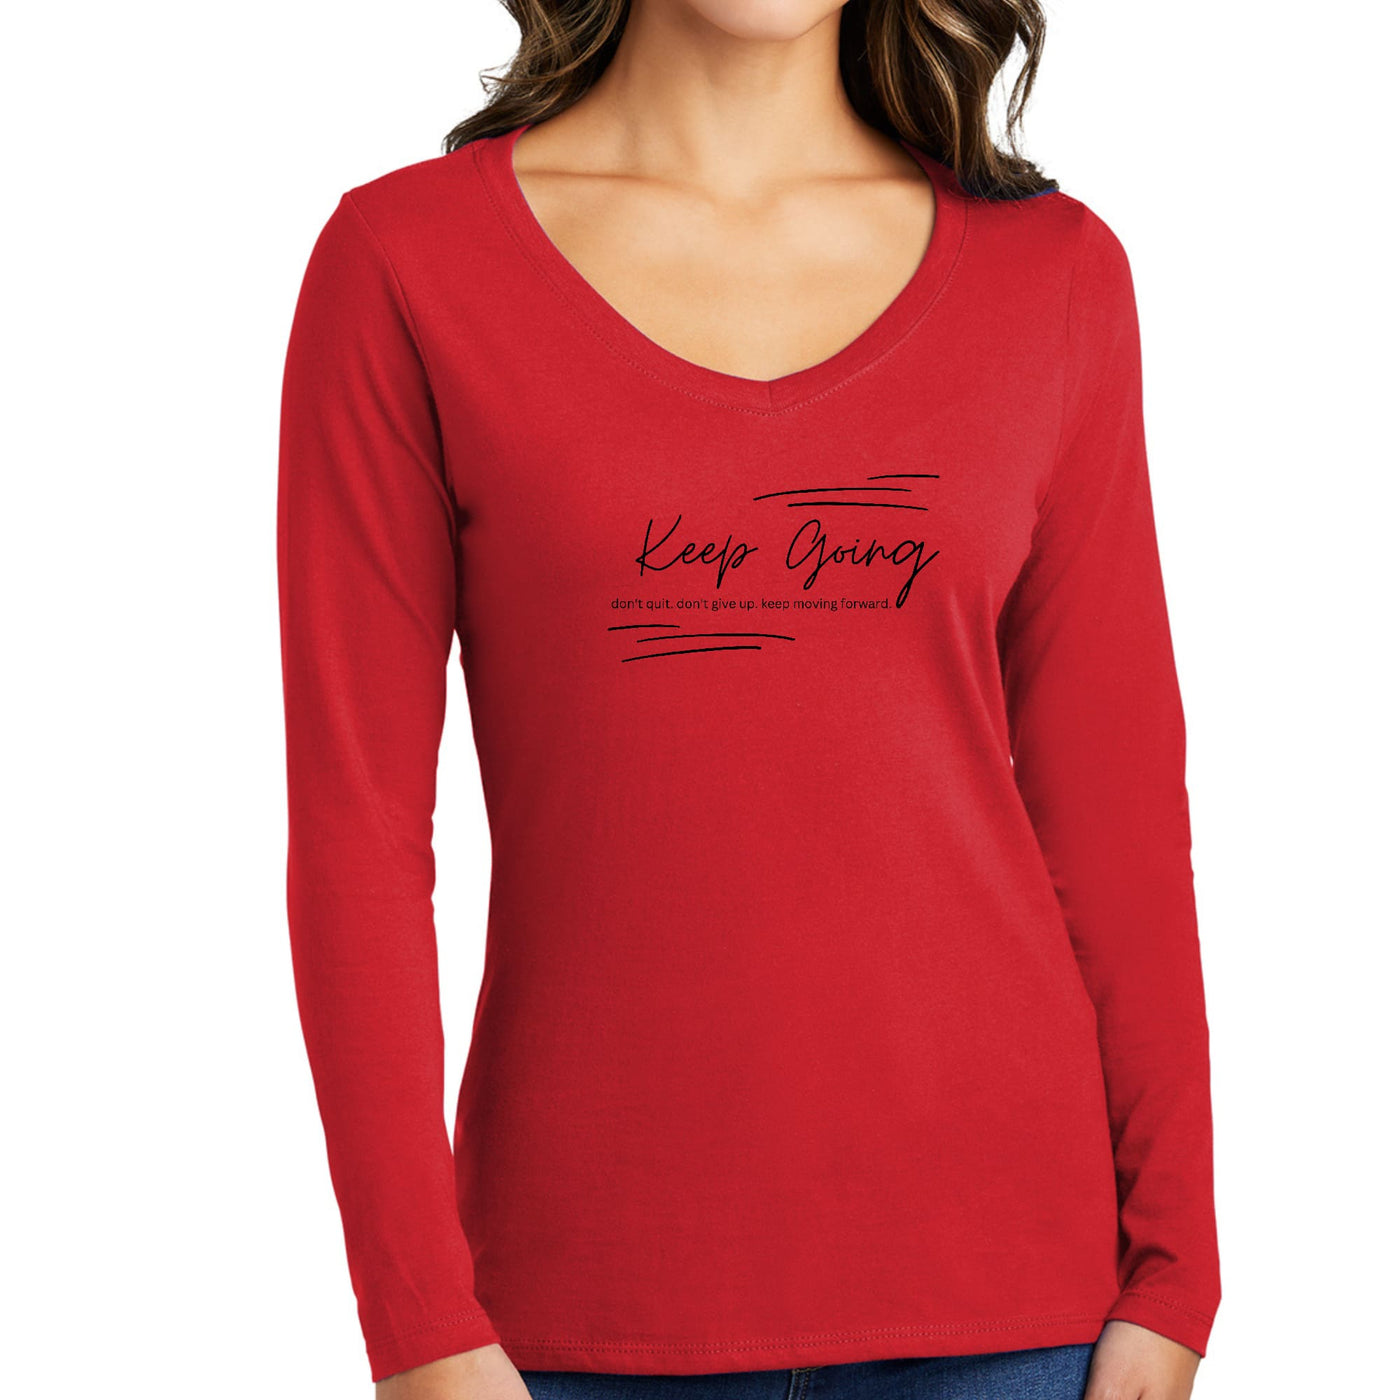 Womens Long Sleeve V - neck Graphic T - shirt Keep Going Don’t Give Up